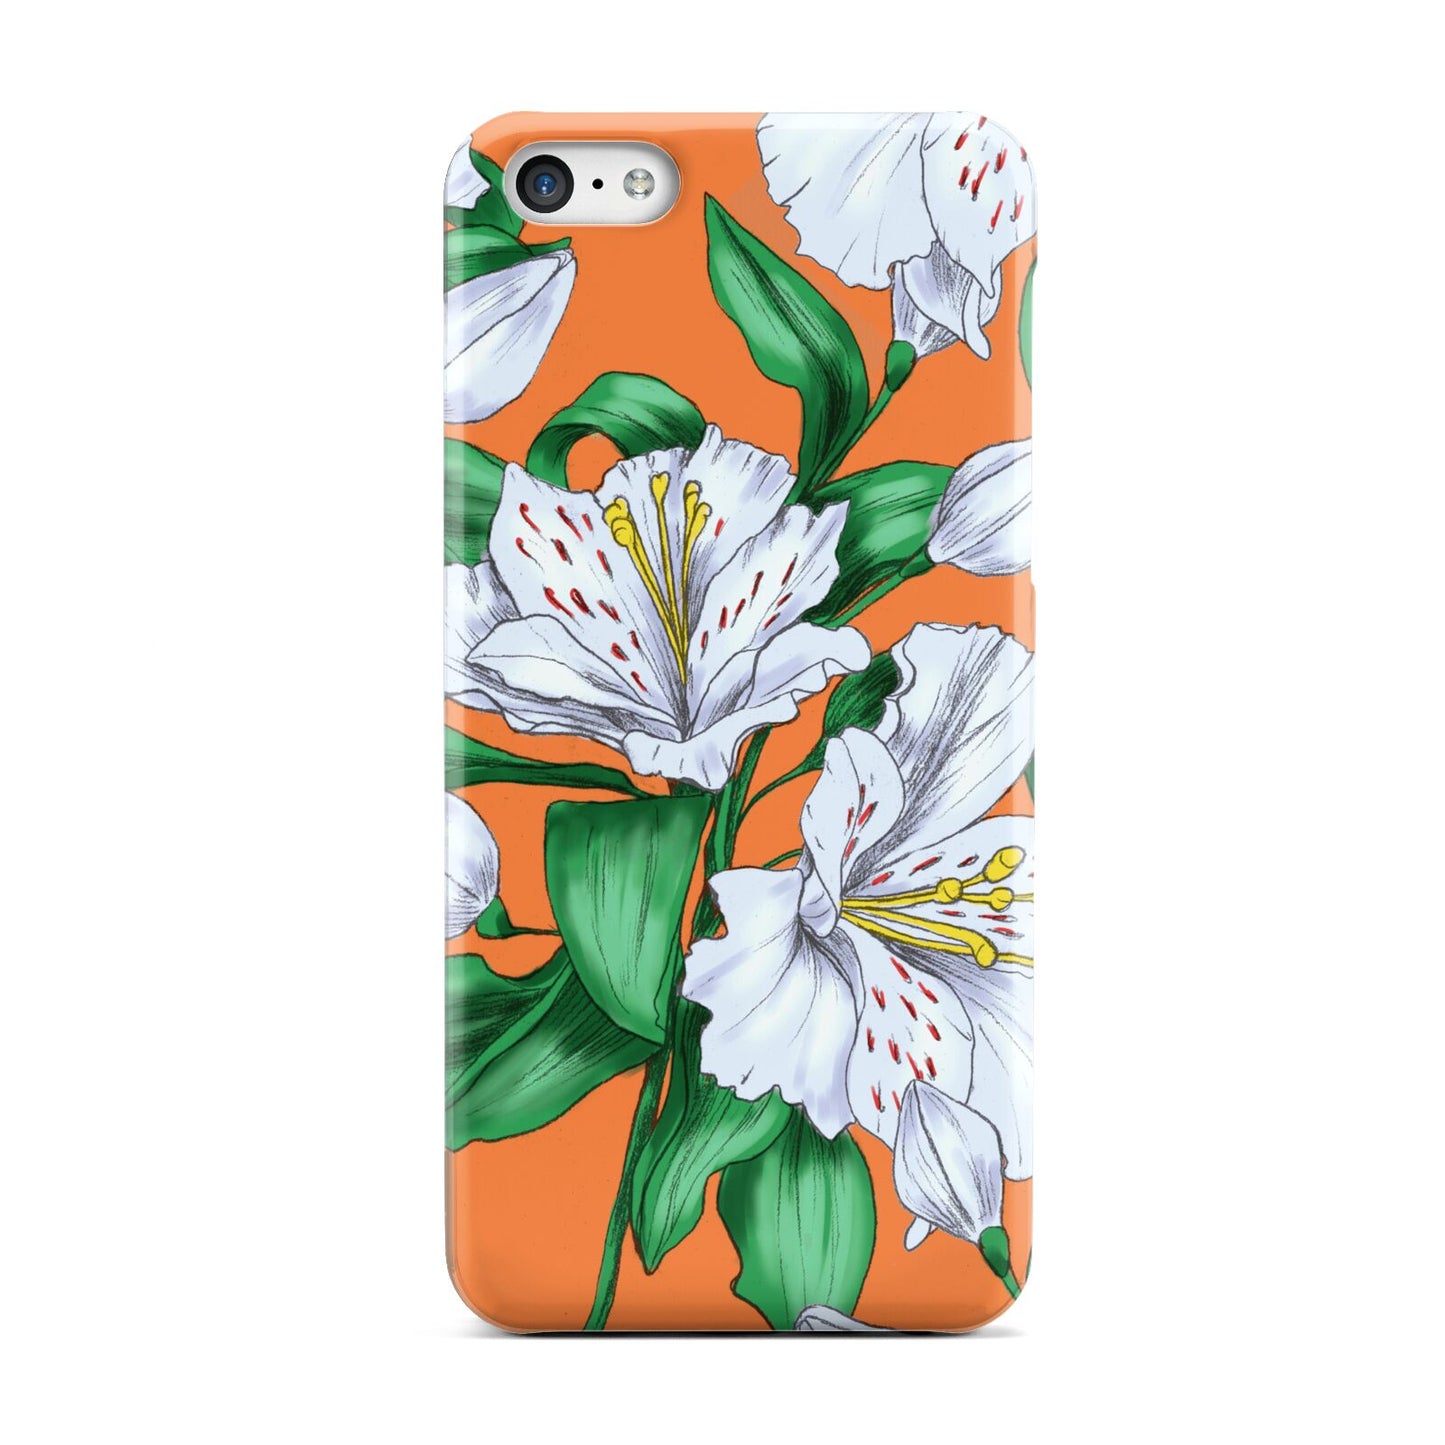 Lily Apple iPhone 5c Case